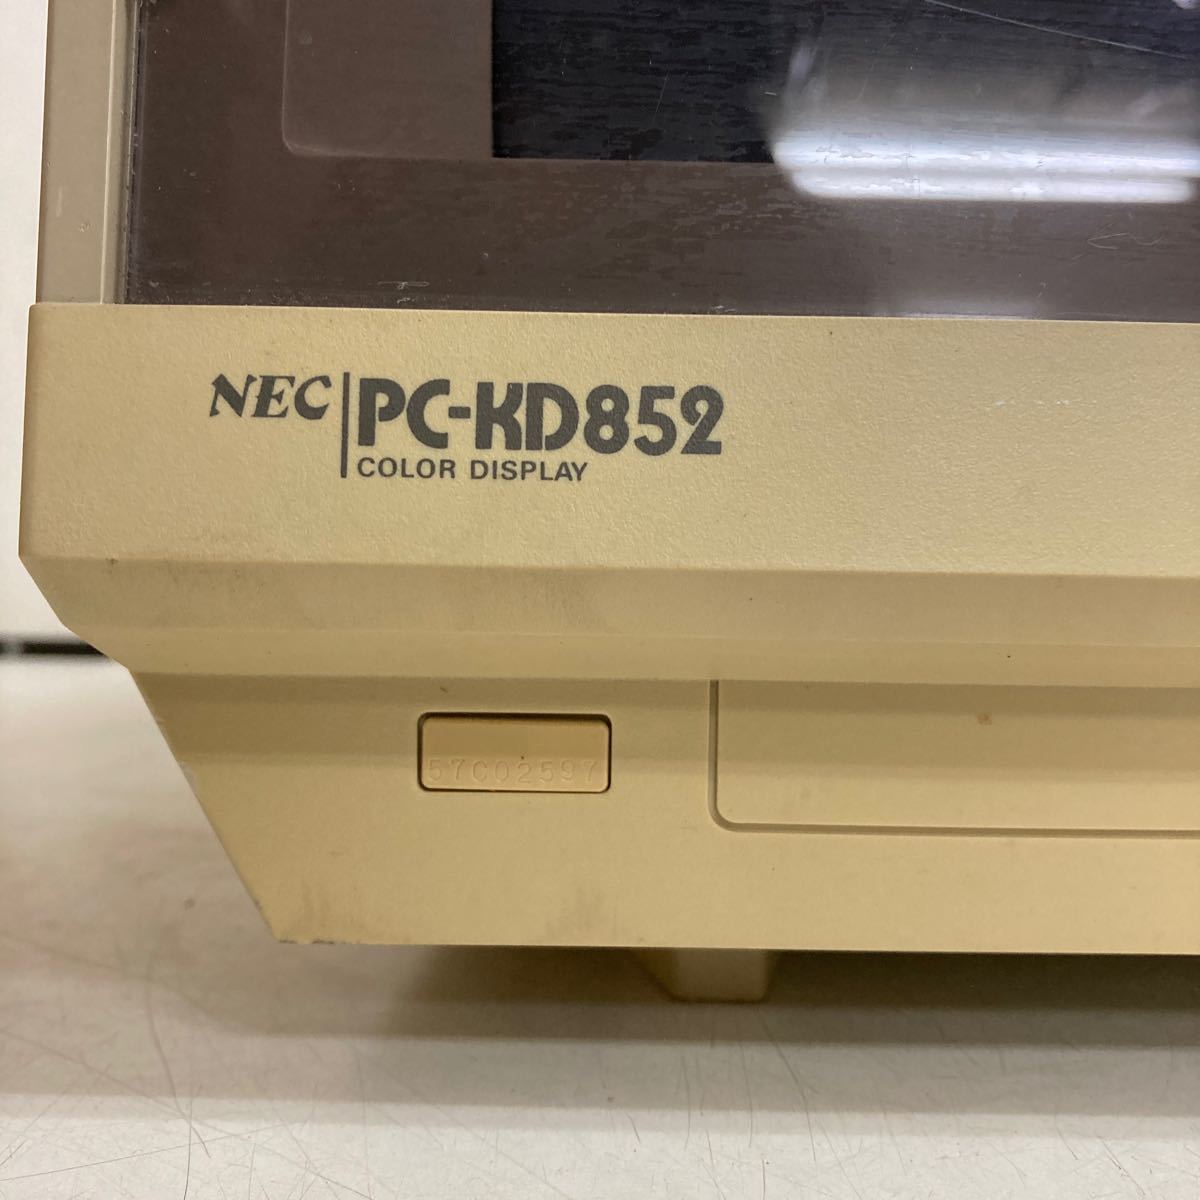 R506 NEC PC-KD852 color display body only / electrification OK junk 